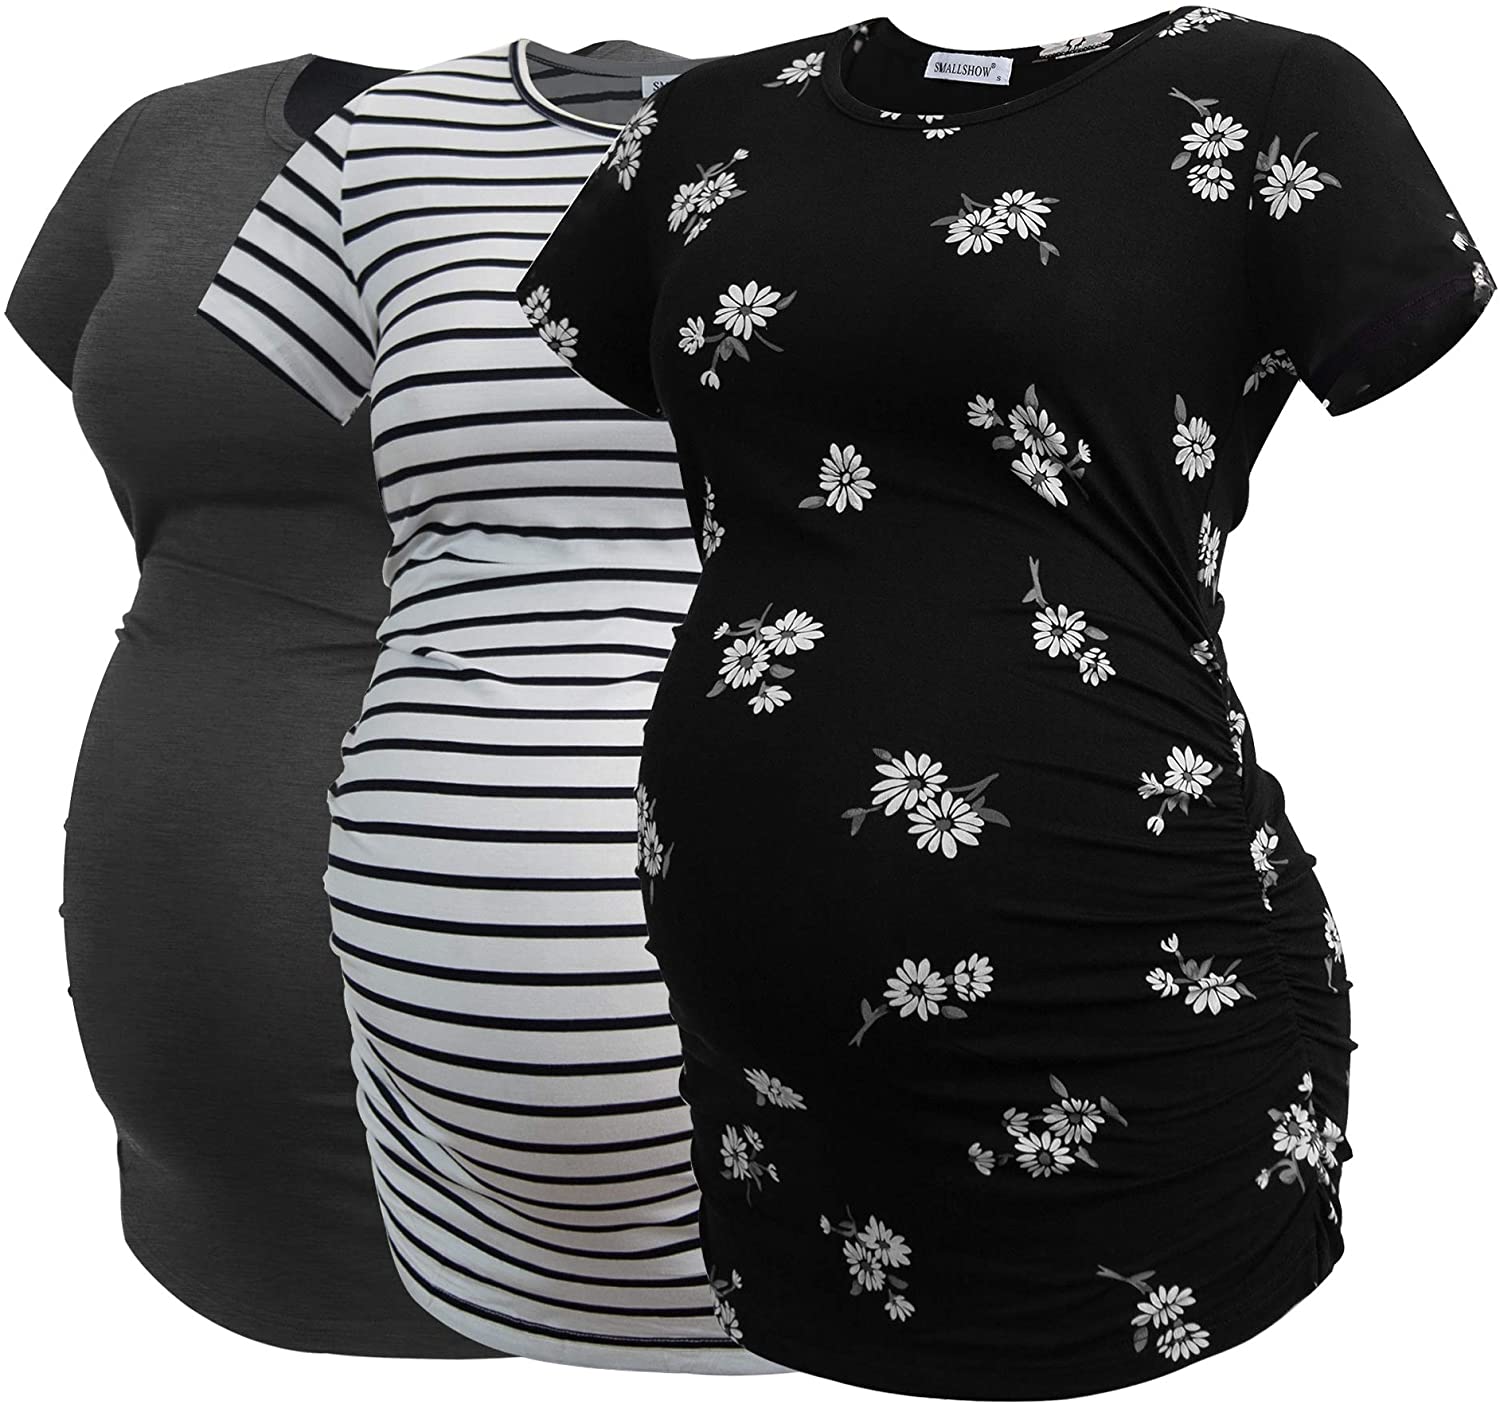 Smallshow Women's Maternity Shirt Tops Side Ruched Pregnancy Clothes Summer 